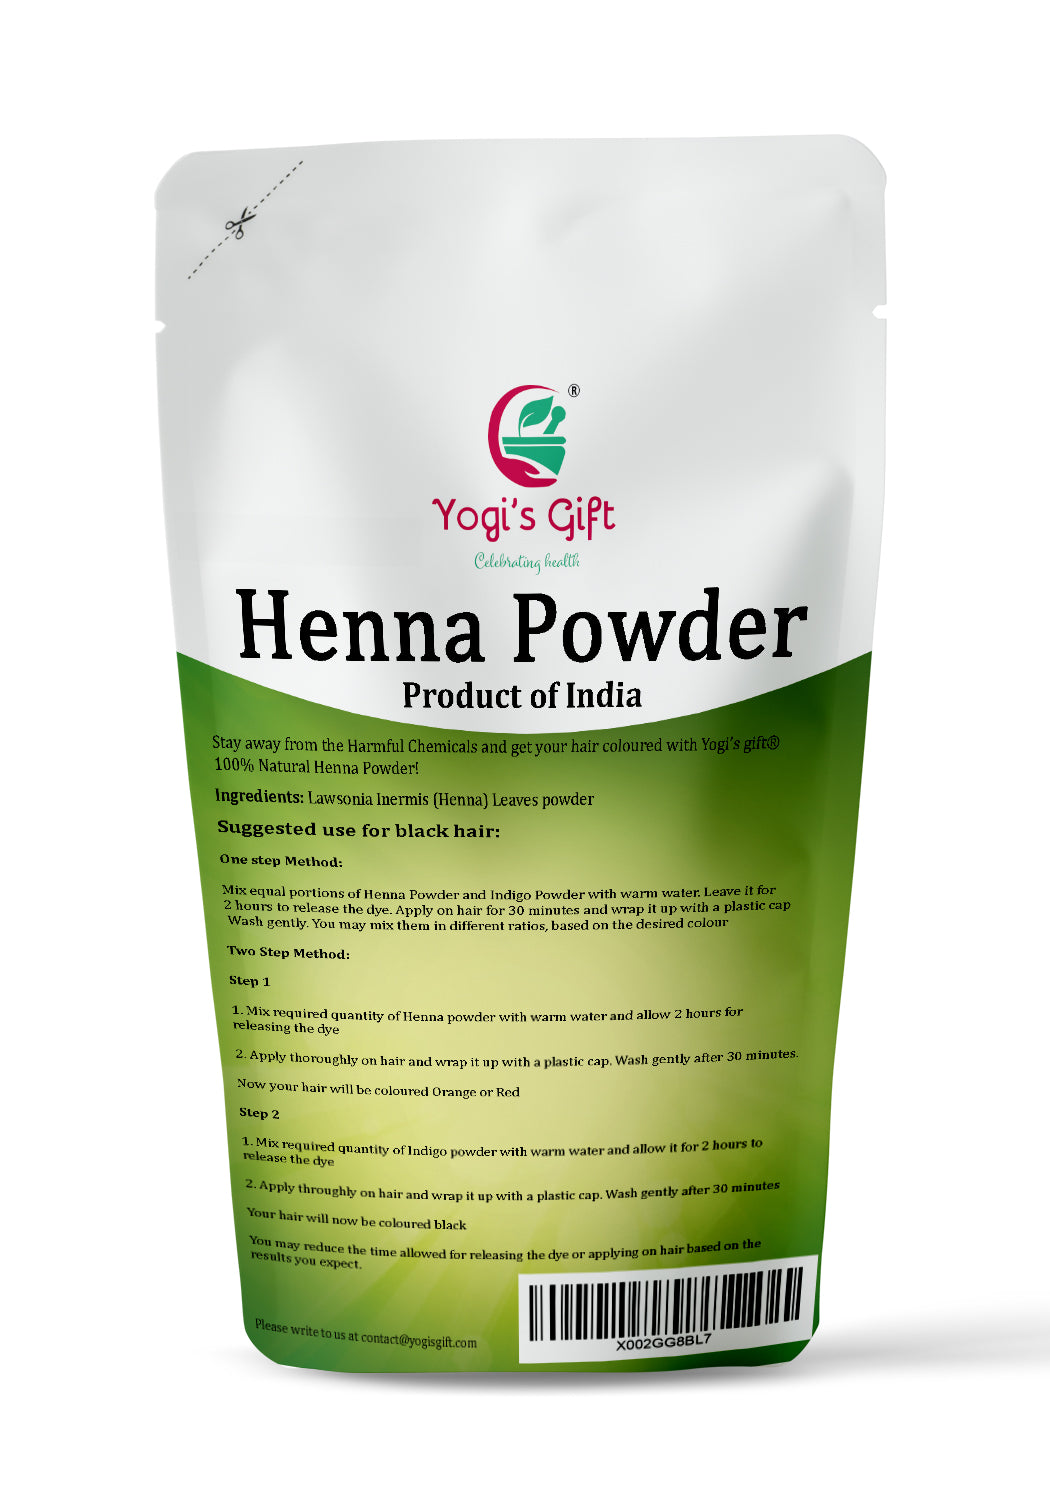 Henna Powder 8 oz | For Hair Color | Red/Orange Hair Coloring | Triple Sifted Henna | Lawsonia Inermis | No chemicals